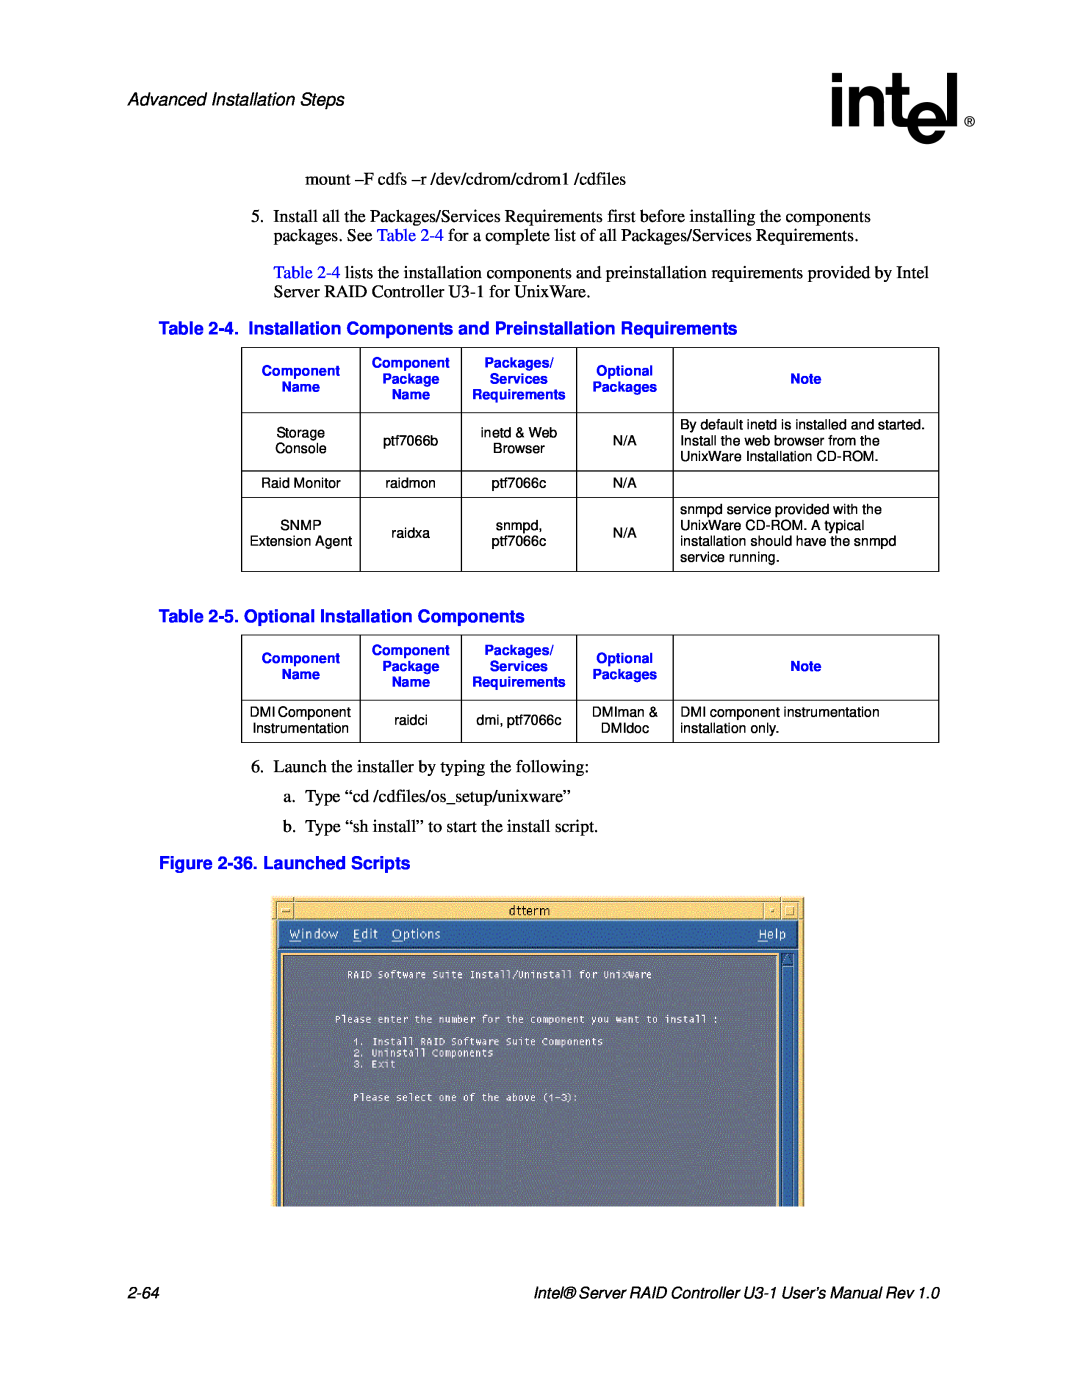 Intel SRCU31 user manual Advanced Installation Steps, 5.Optional Installation Components, 36.Launched Scripts 